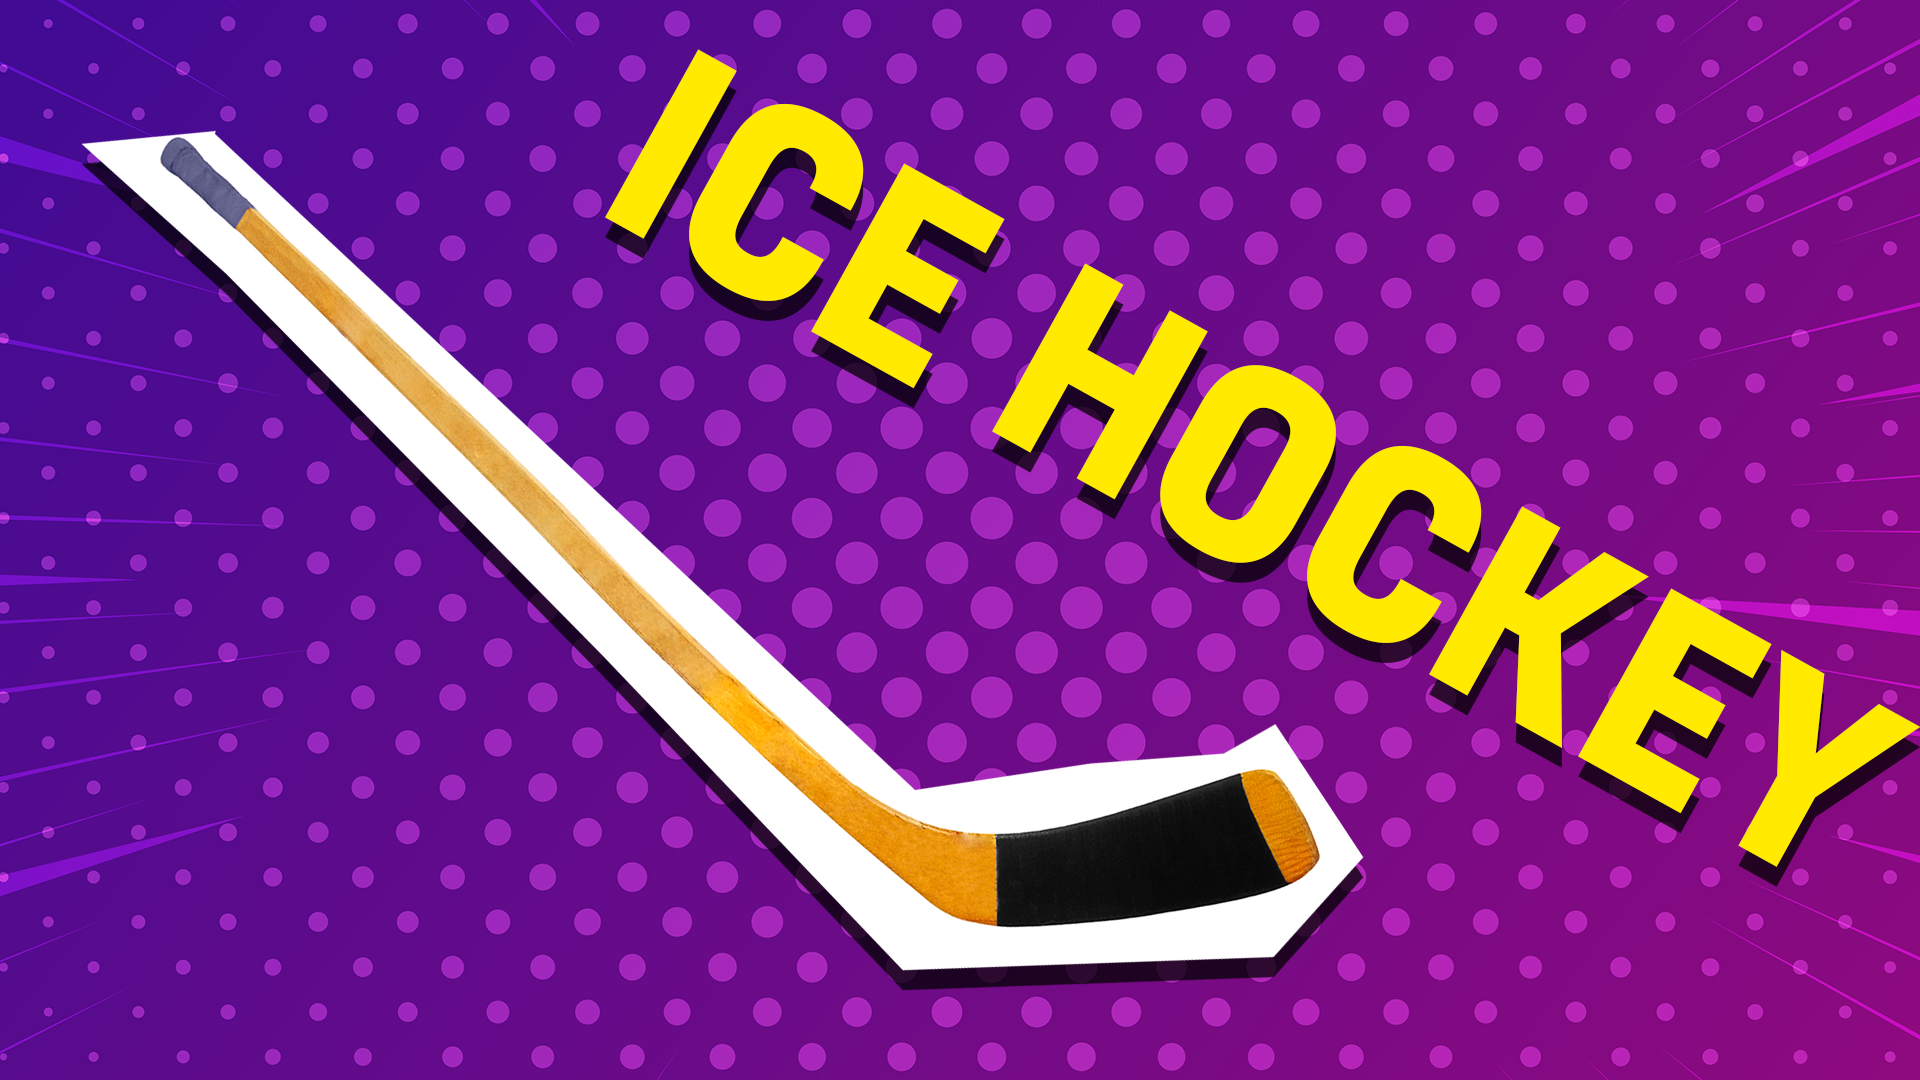 Hockey stick with the words ice hockey on a purple background